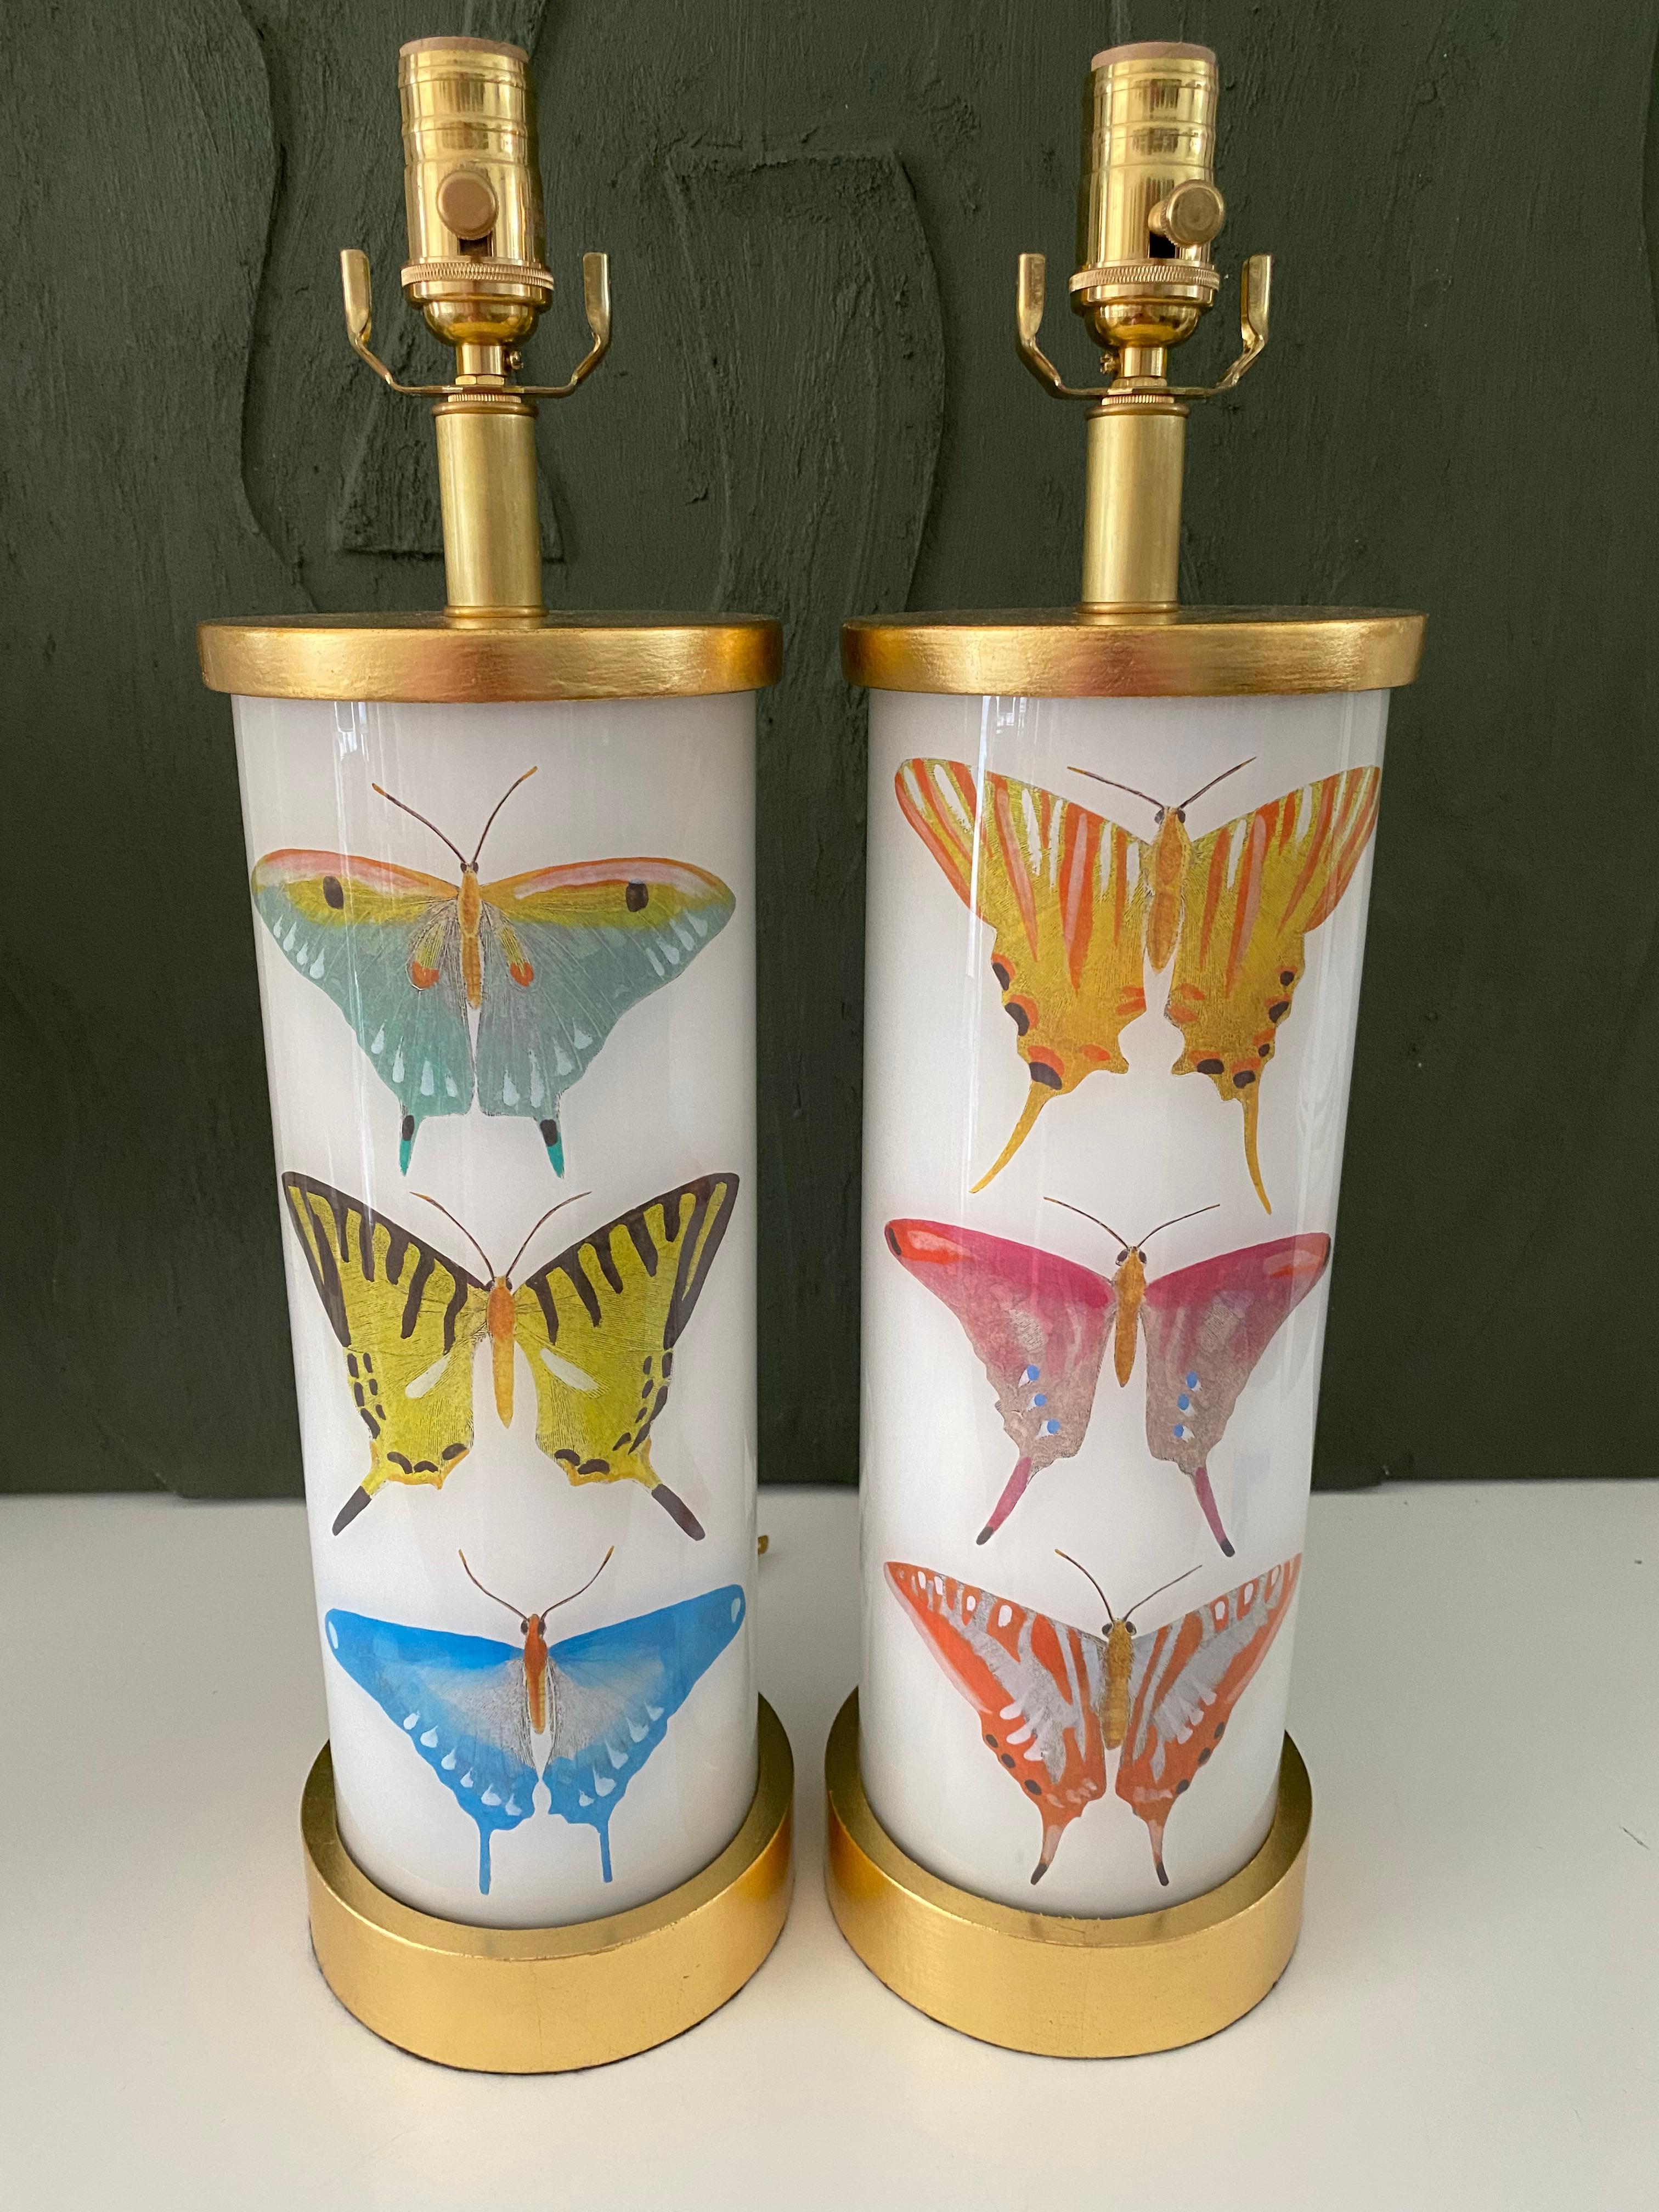 Hand made with care in Houston, Texas. This pair of glass lamps features a selection of 18th century hand-colored engravings of beautiful butterflies, with hand-turned gilt wood base and cap, antique brass dimmer socket and clear cord. All UL listed